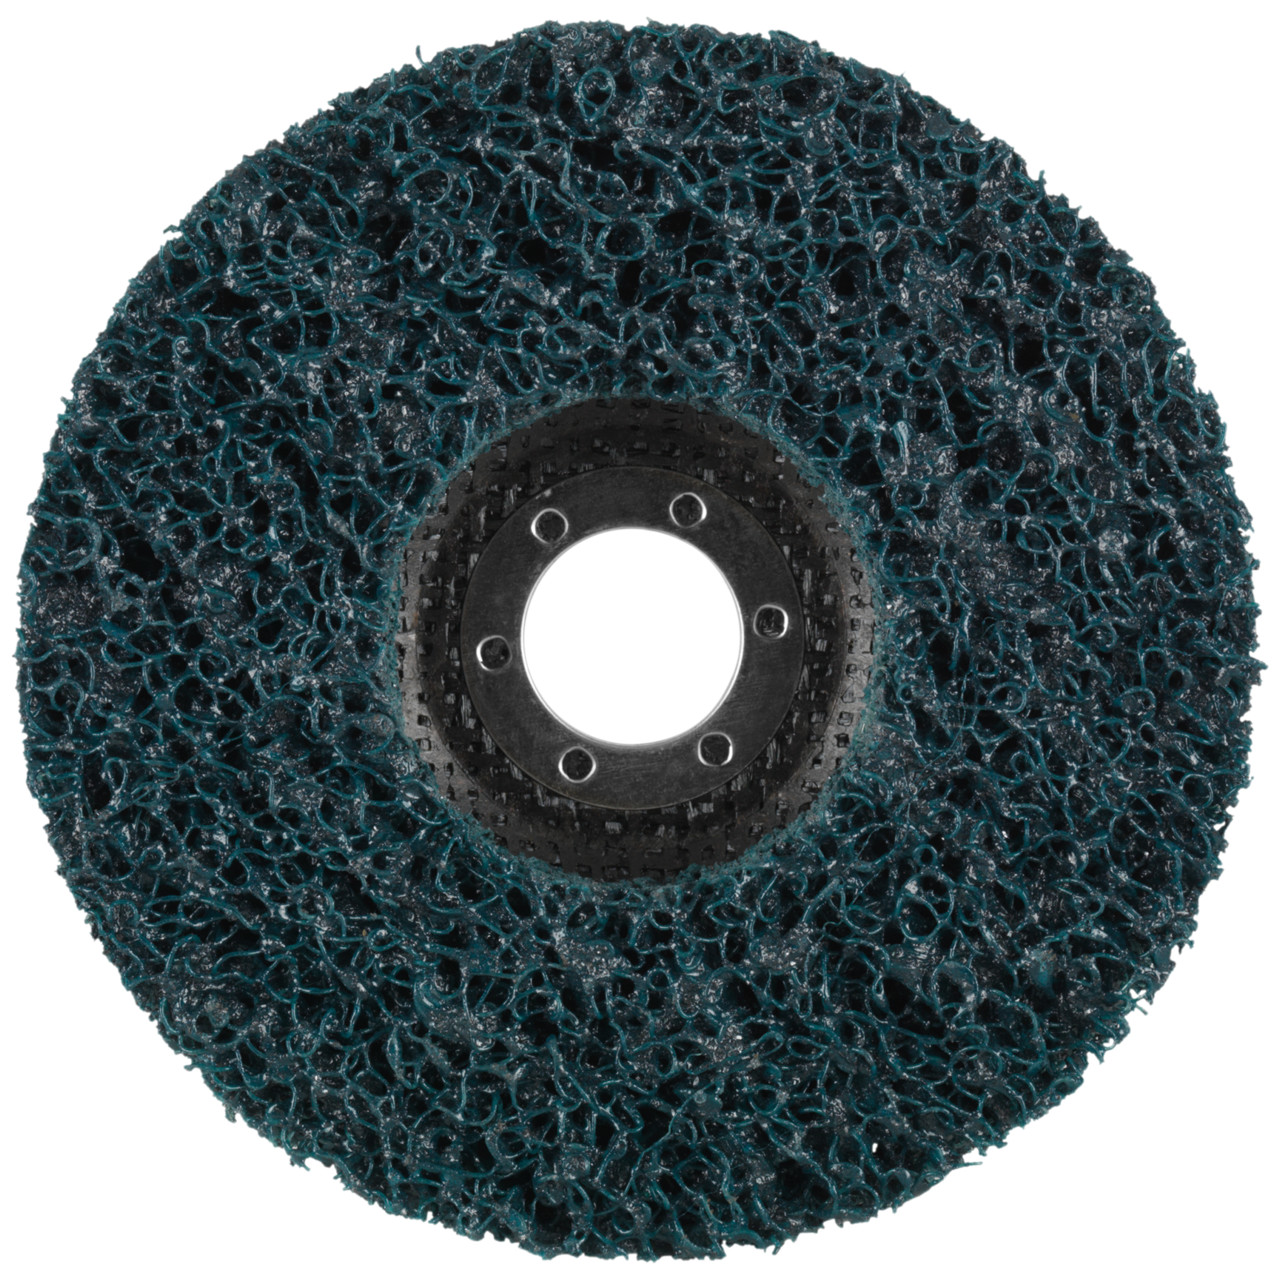 Tyrolit Coarse cleaning disc DxH 125x22.2 Universally applicable, C GROB, shape: 28- (coarse cleaning disc), Art. 898017